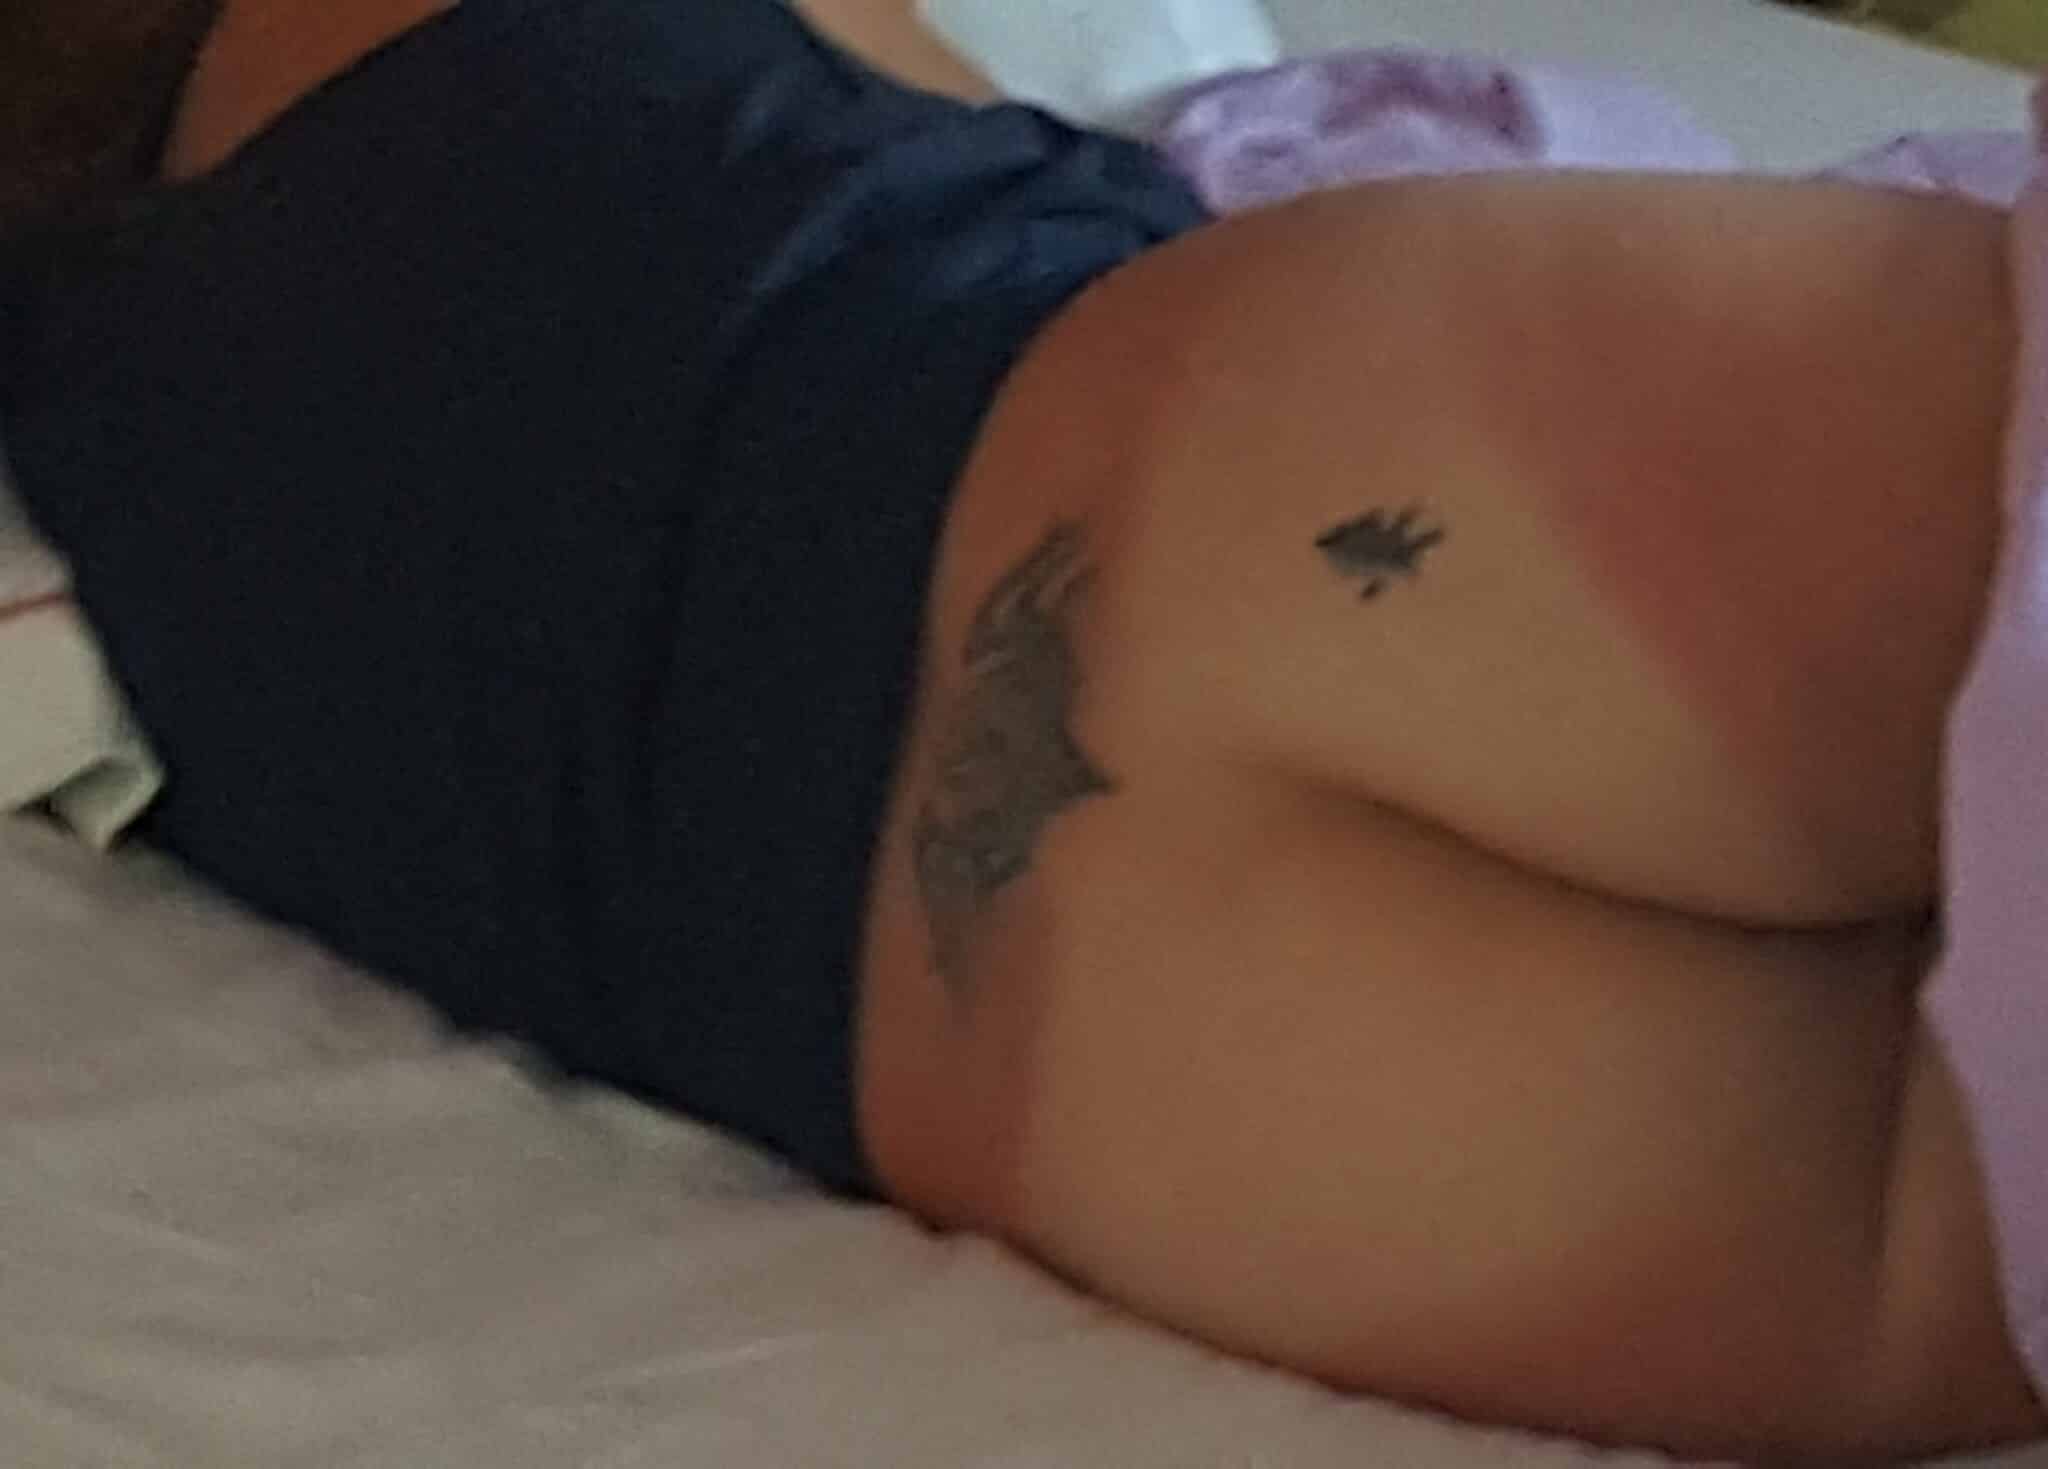 2560px x 1836px - Tramp stamp Ass Flash Pics, MILF Flashing Pics, No Panties Pics, Real  Amateurs from Google, Tumblr, Pinterest, Facebook, Twitter, Instagram and  Snapchat.